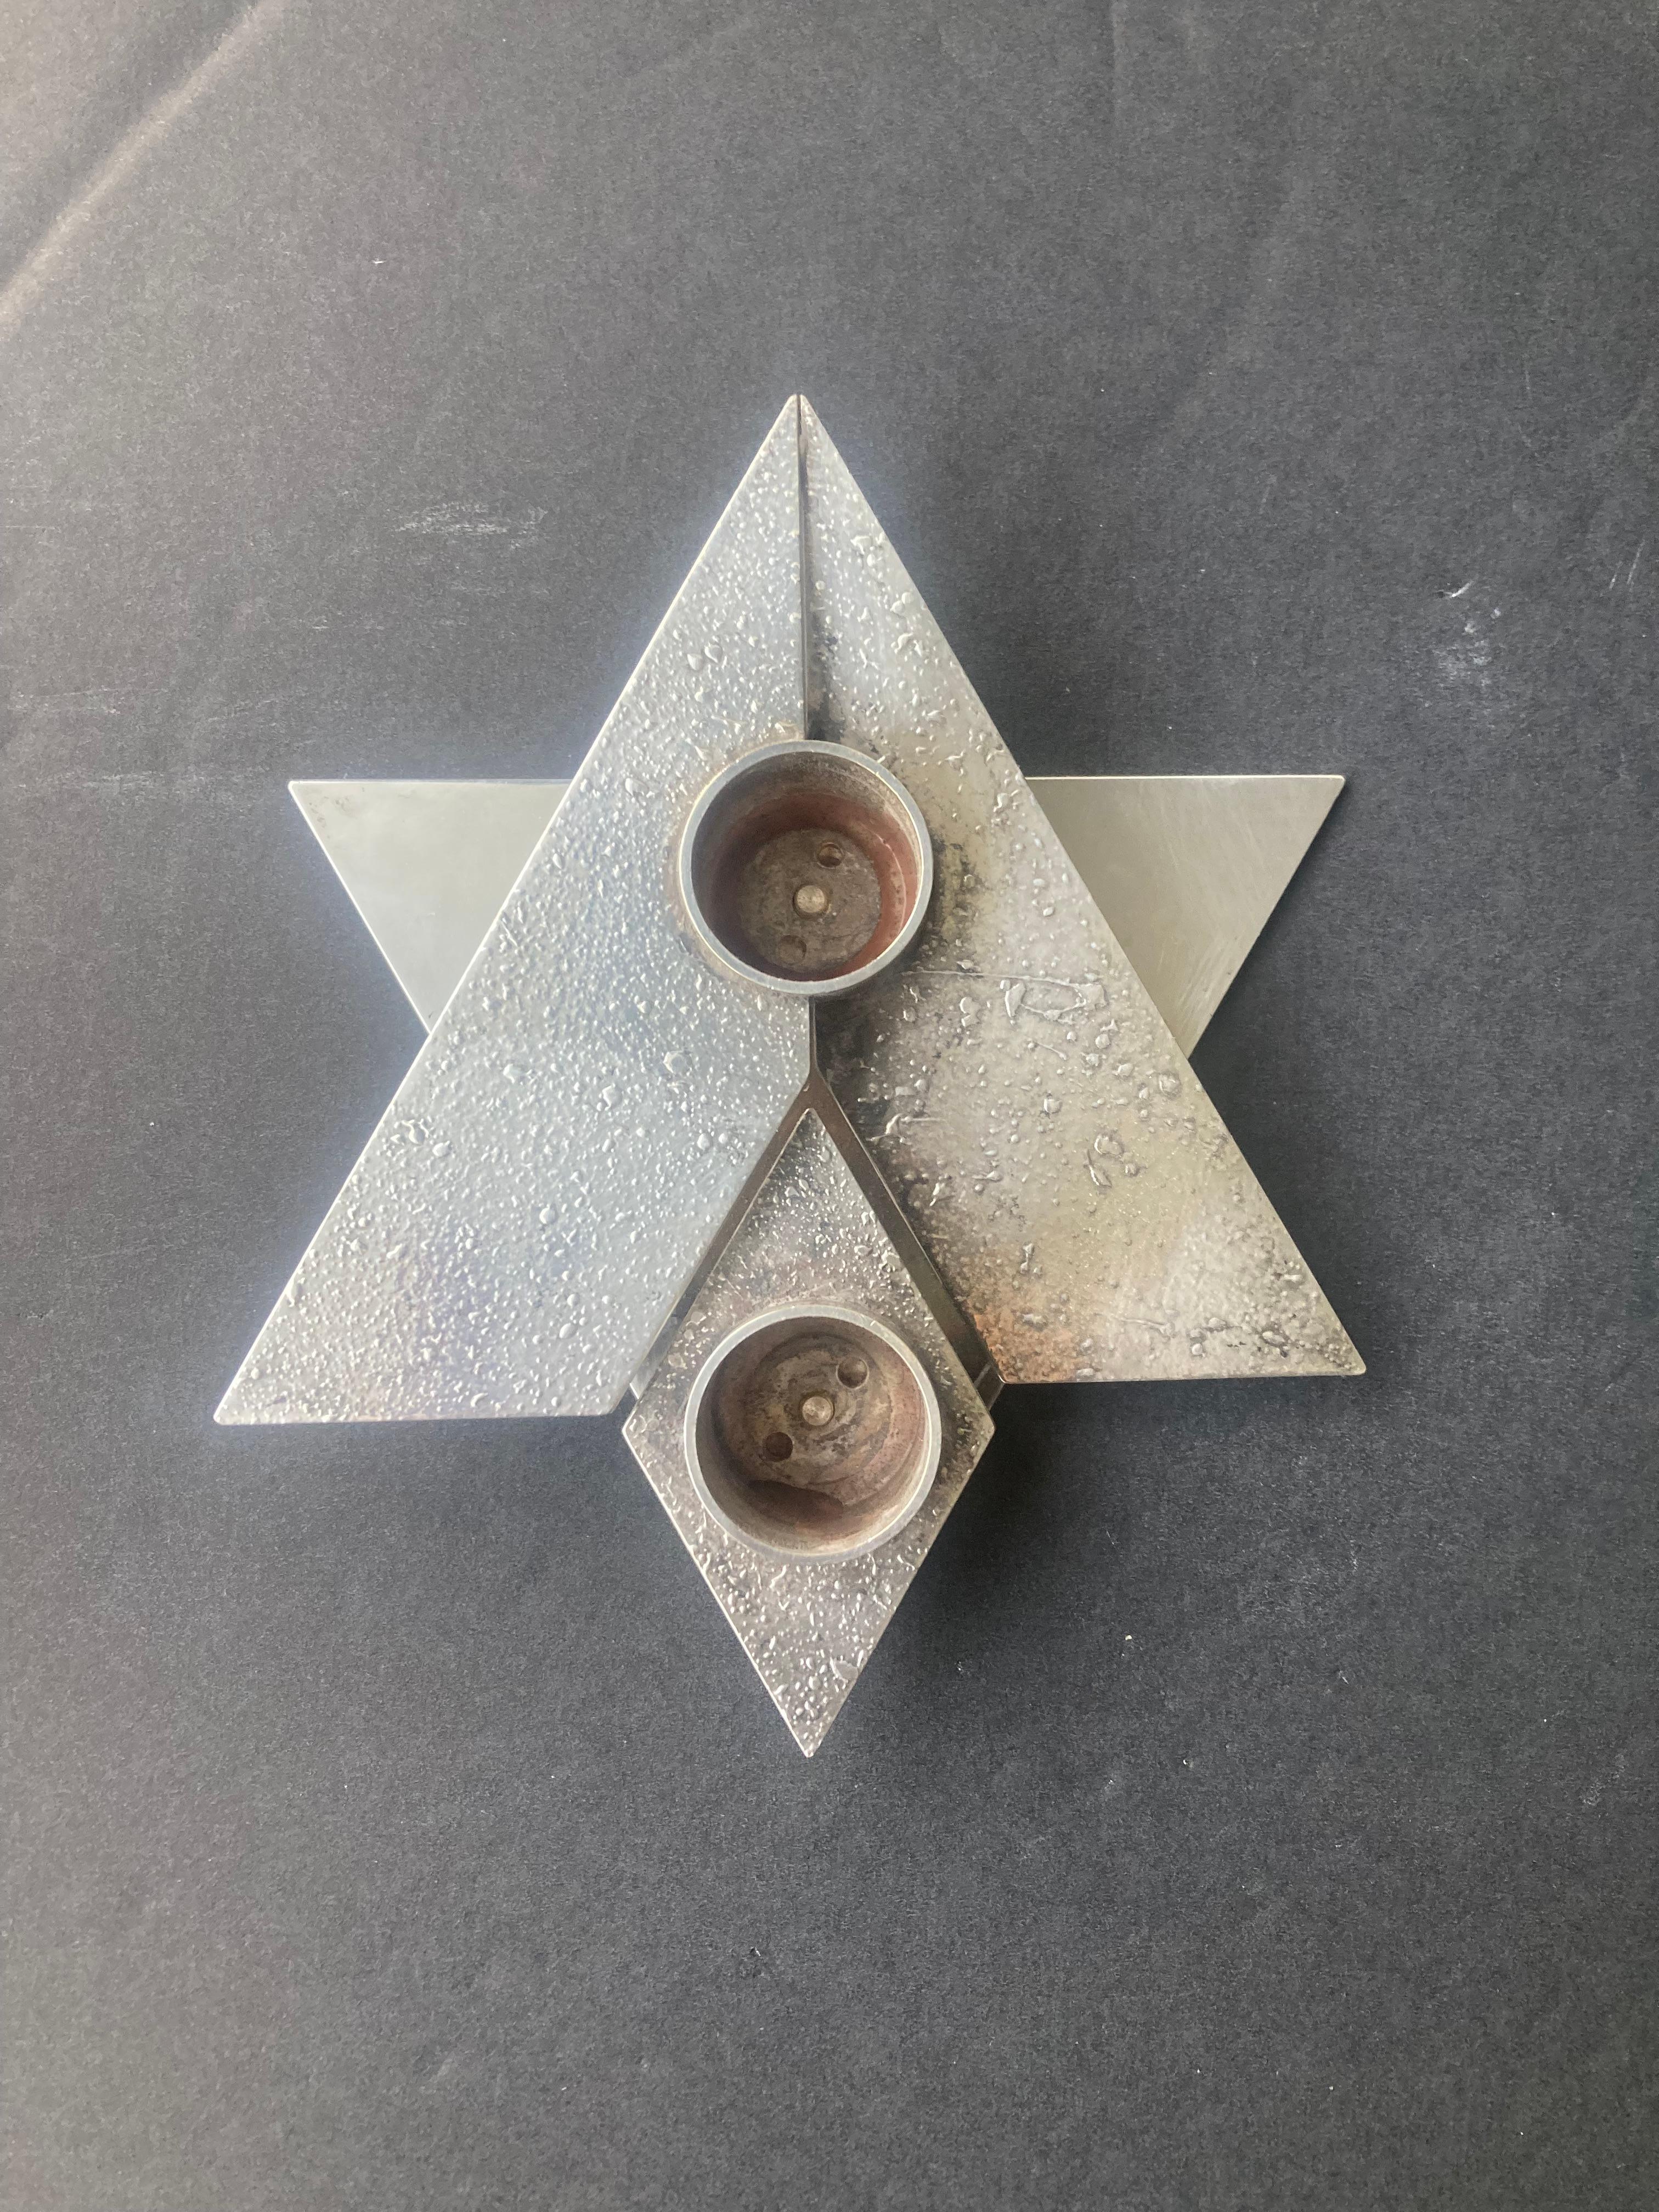 Very nice candleholder by the very well known silversmith and jeweler Yehia Yemini ( Yihye Yemini, 1896-1983) Bezalel School Jerusalem .This candleholder made in Star of David shape and some kind of antique finish surface in the 1980's just before